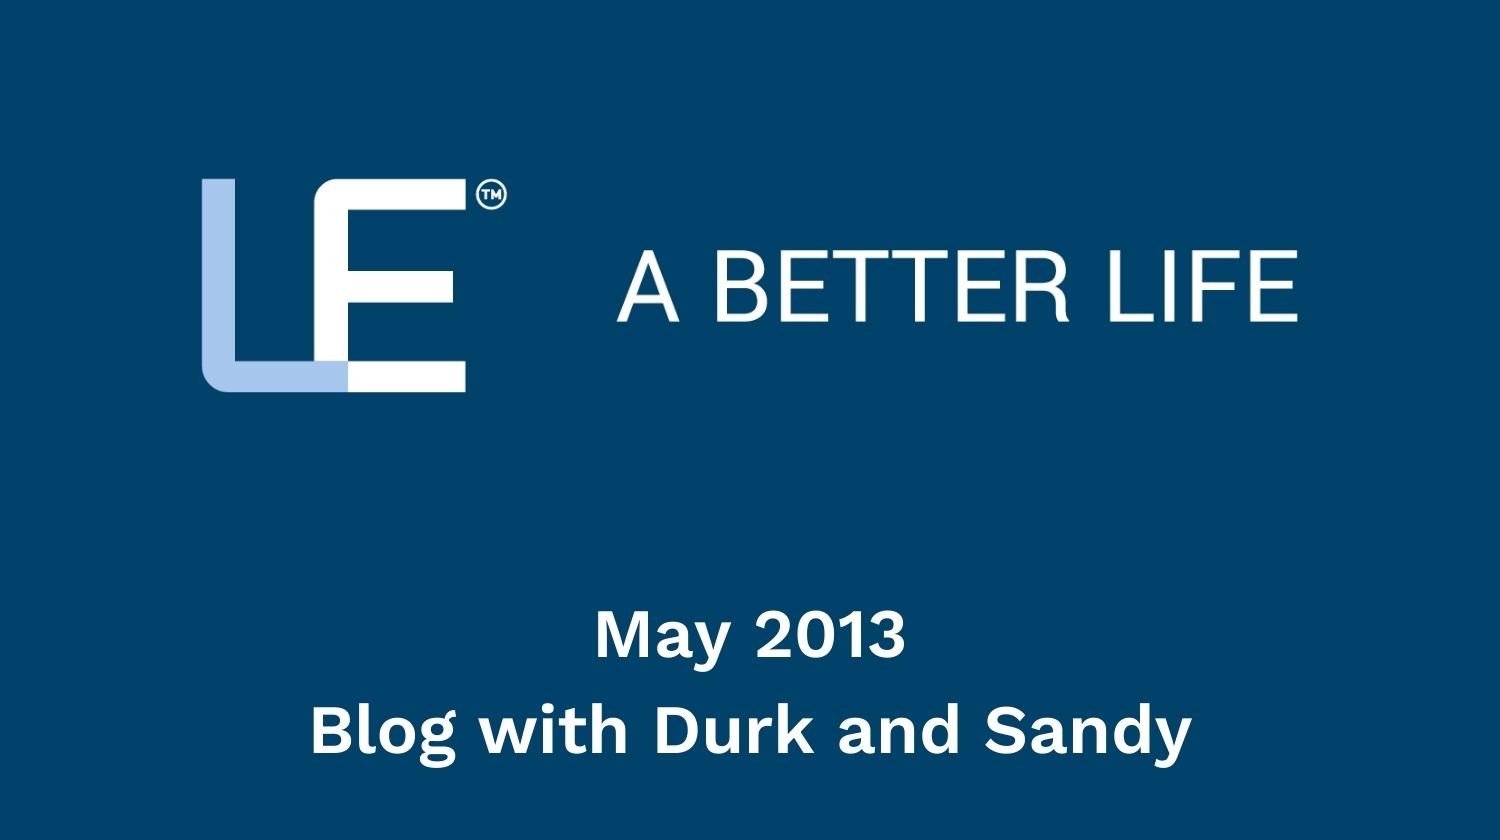 May 2013 Blog with Durk and Sandy